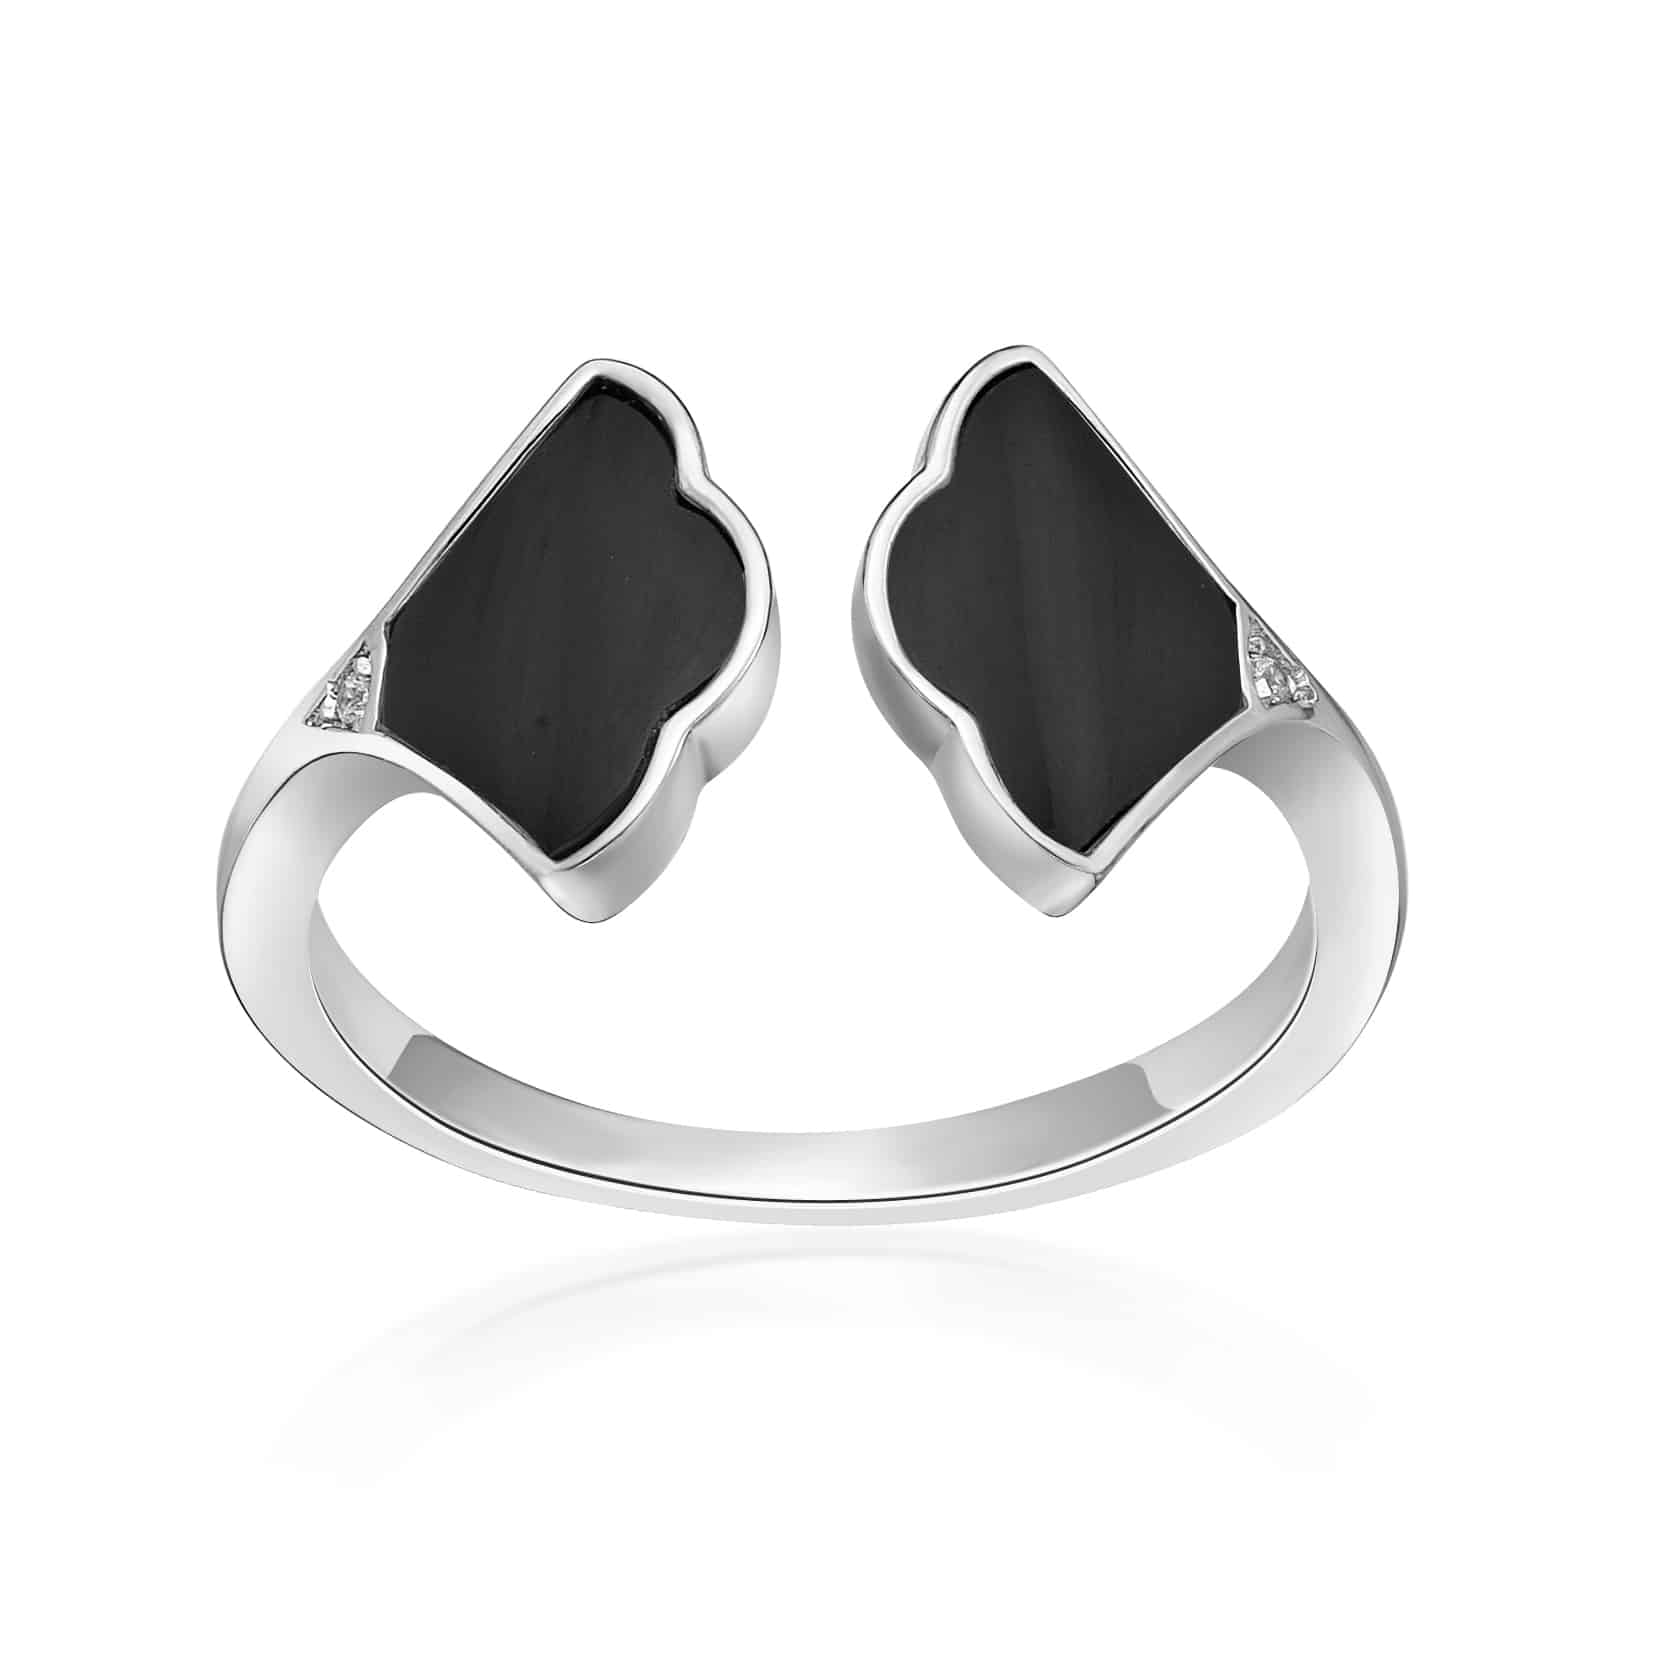 Handmade 925 Sterling Silver Black Onyx Mini Ring, Weight: 6g Approx, 4-16  Us Size Available at Rs 699/piece in Jaipur